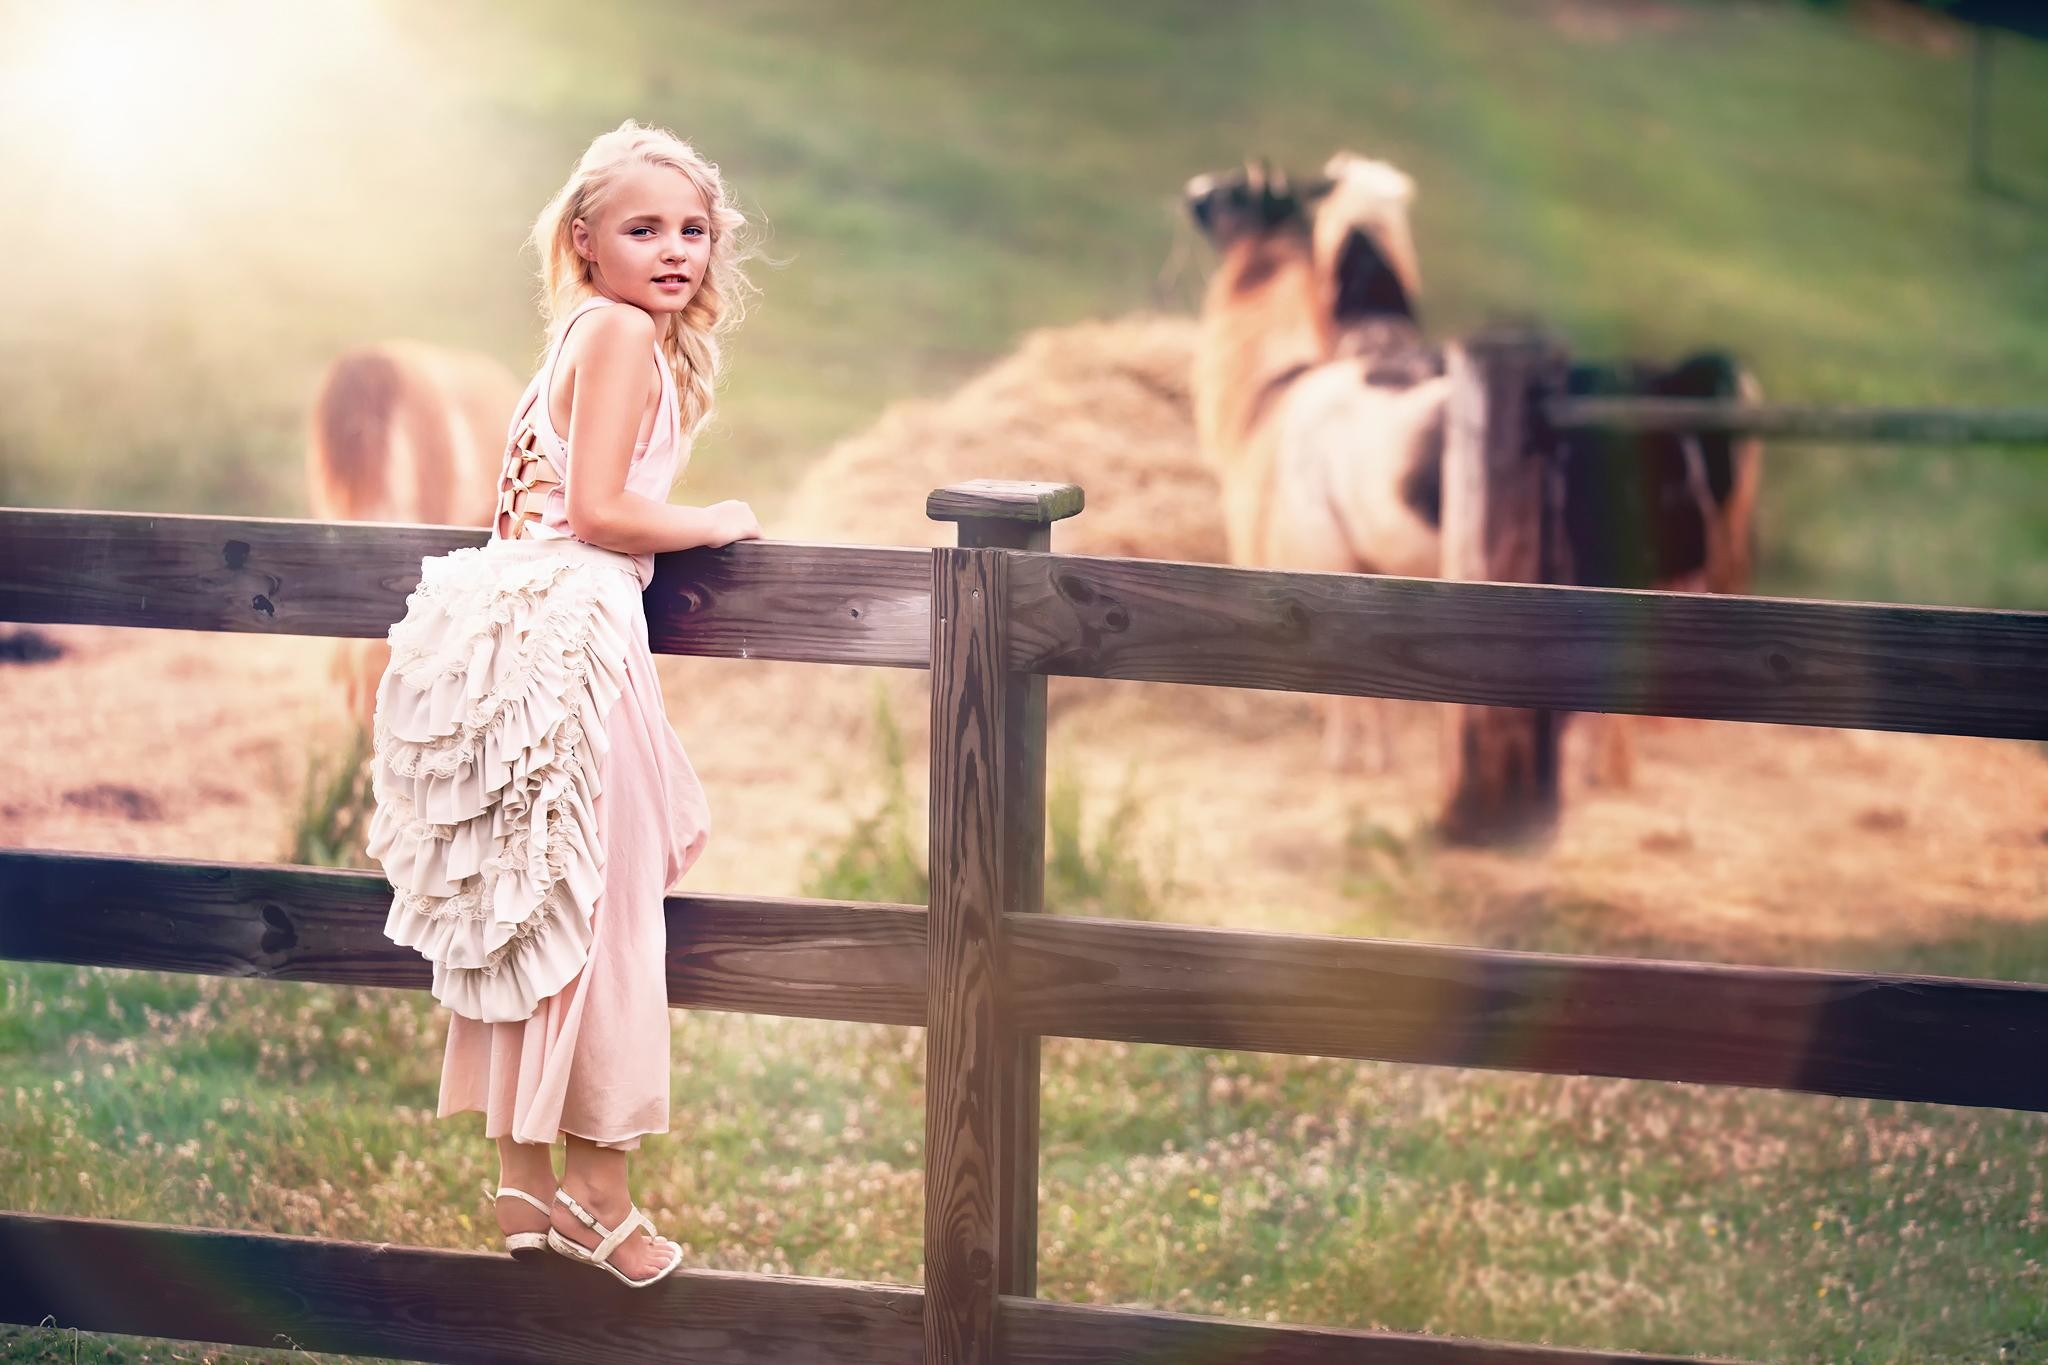 2048x1365 wallpaper.wiki-Photography-baby-girl-fence-country-farm-